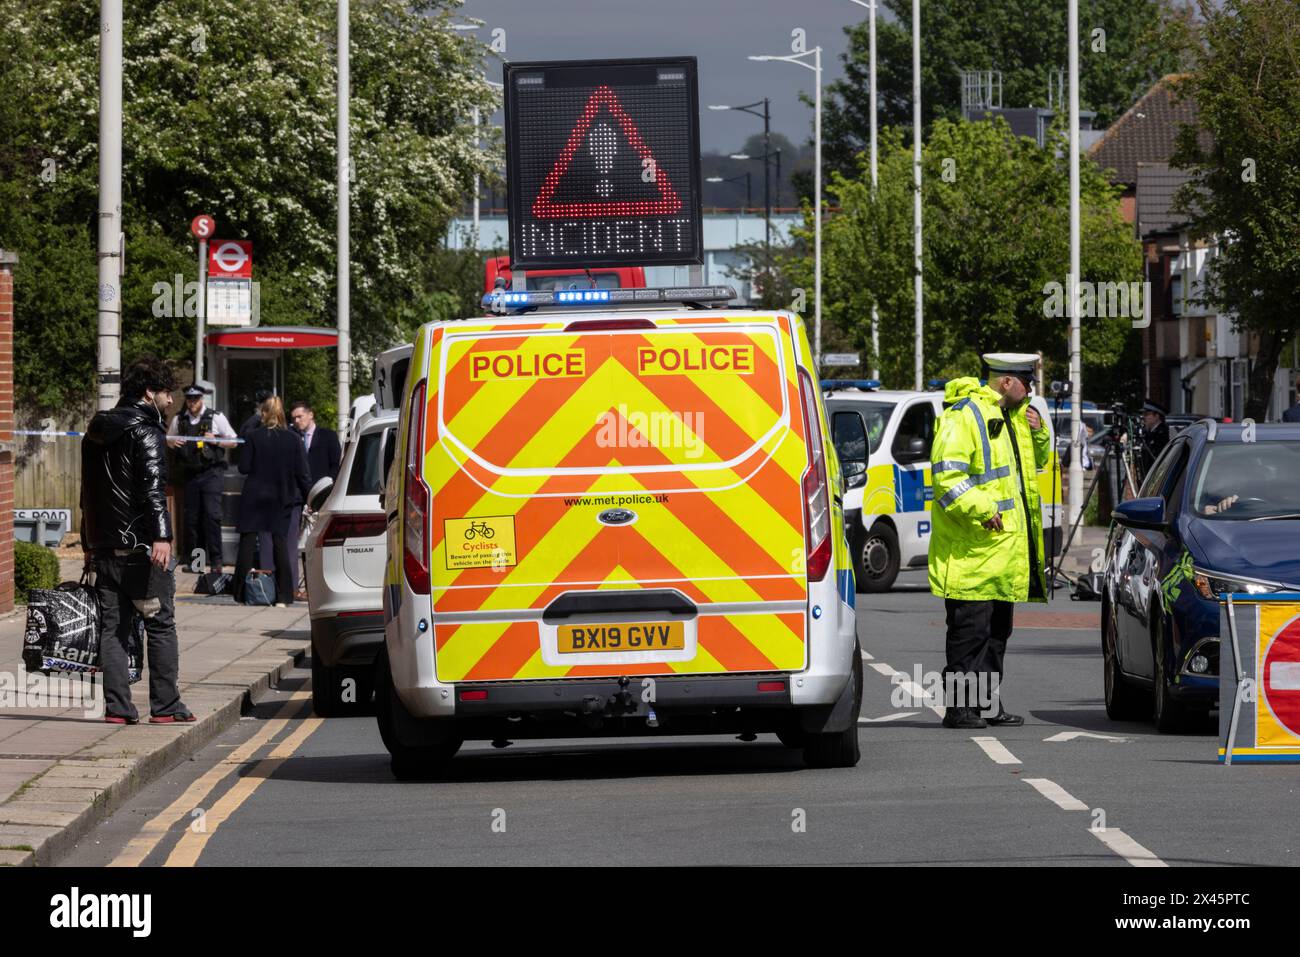 Police and other emergency services in Hainault, east London, at a serious incident in which a man with a sword was arrested after attacking people. Stock Photo